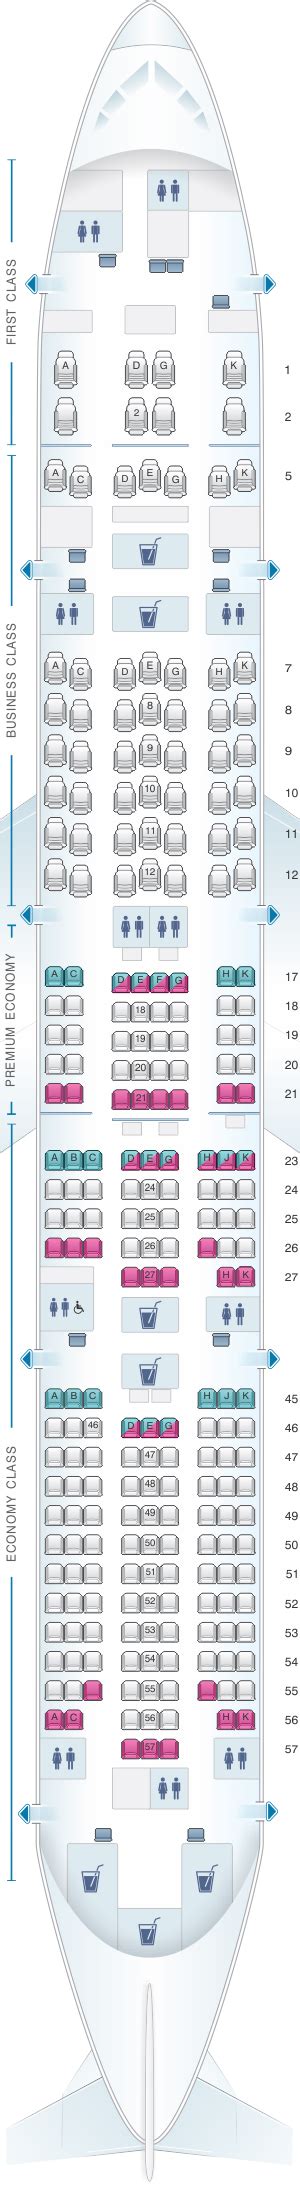 japan airlines 777-300 seat map